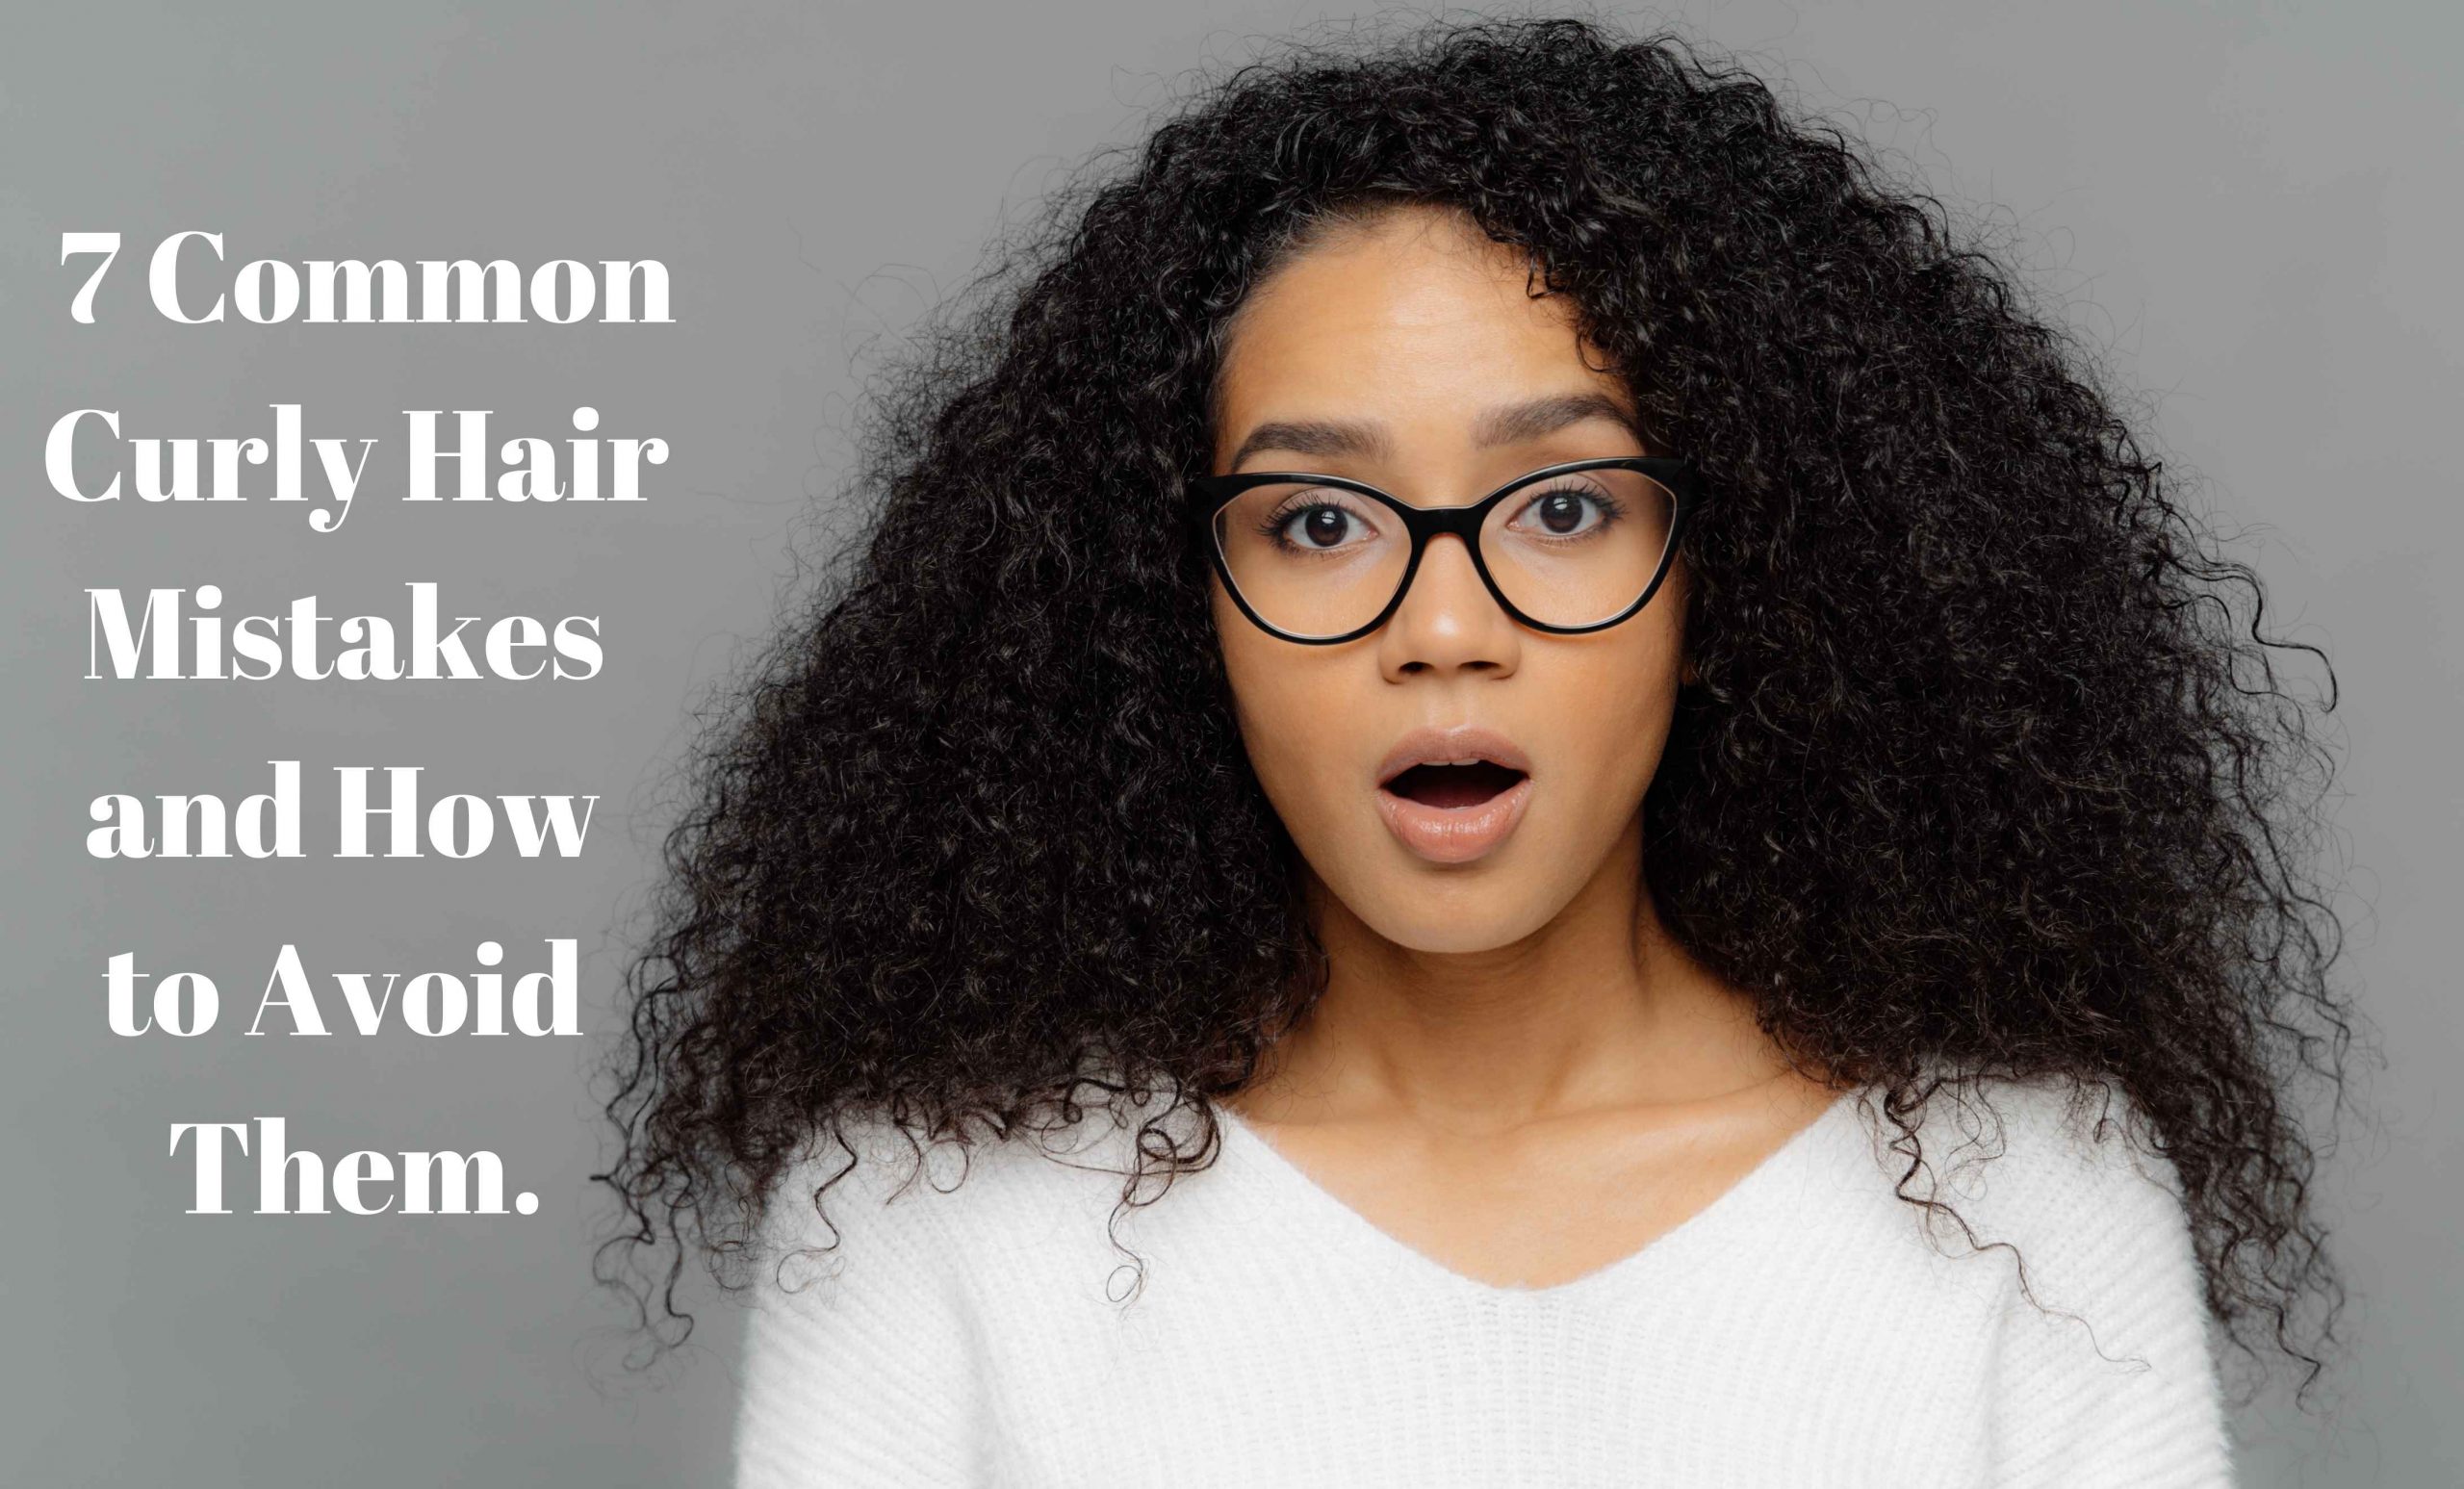 10. The Top Mistakes to Avoid When Maintaining Blonde Curly Hair - wide 6